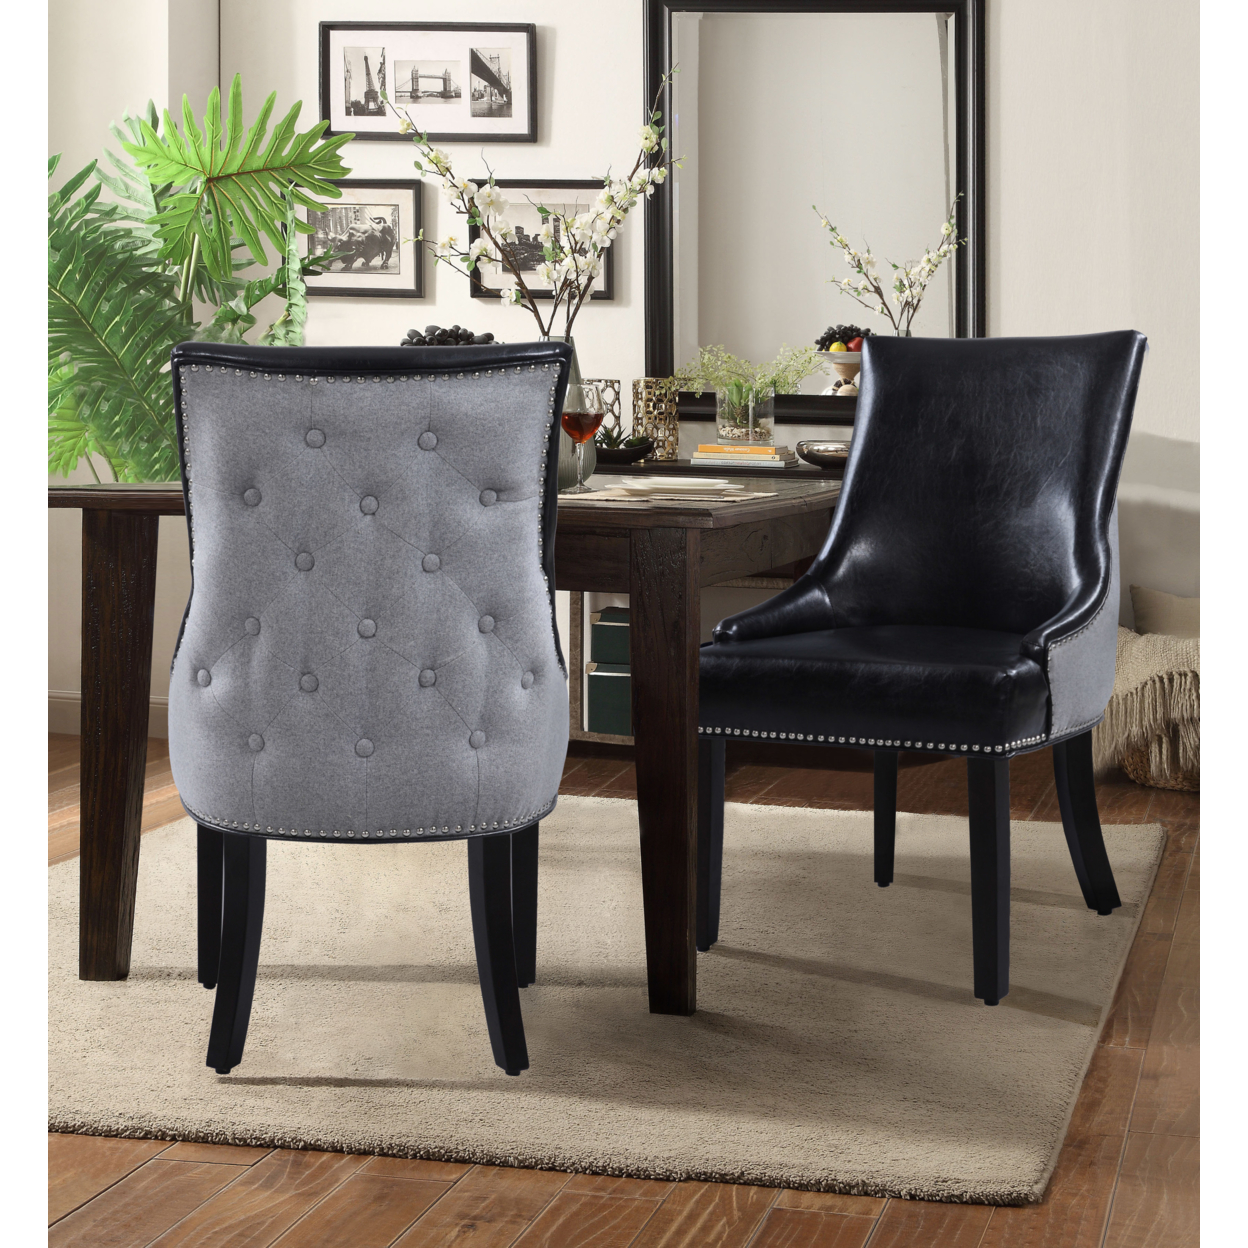 Taylor PU Leather Dining Chair, Set Of 2, Linen Button Tufted With Silver Nailhead Solid Birch Legs - Black